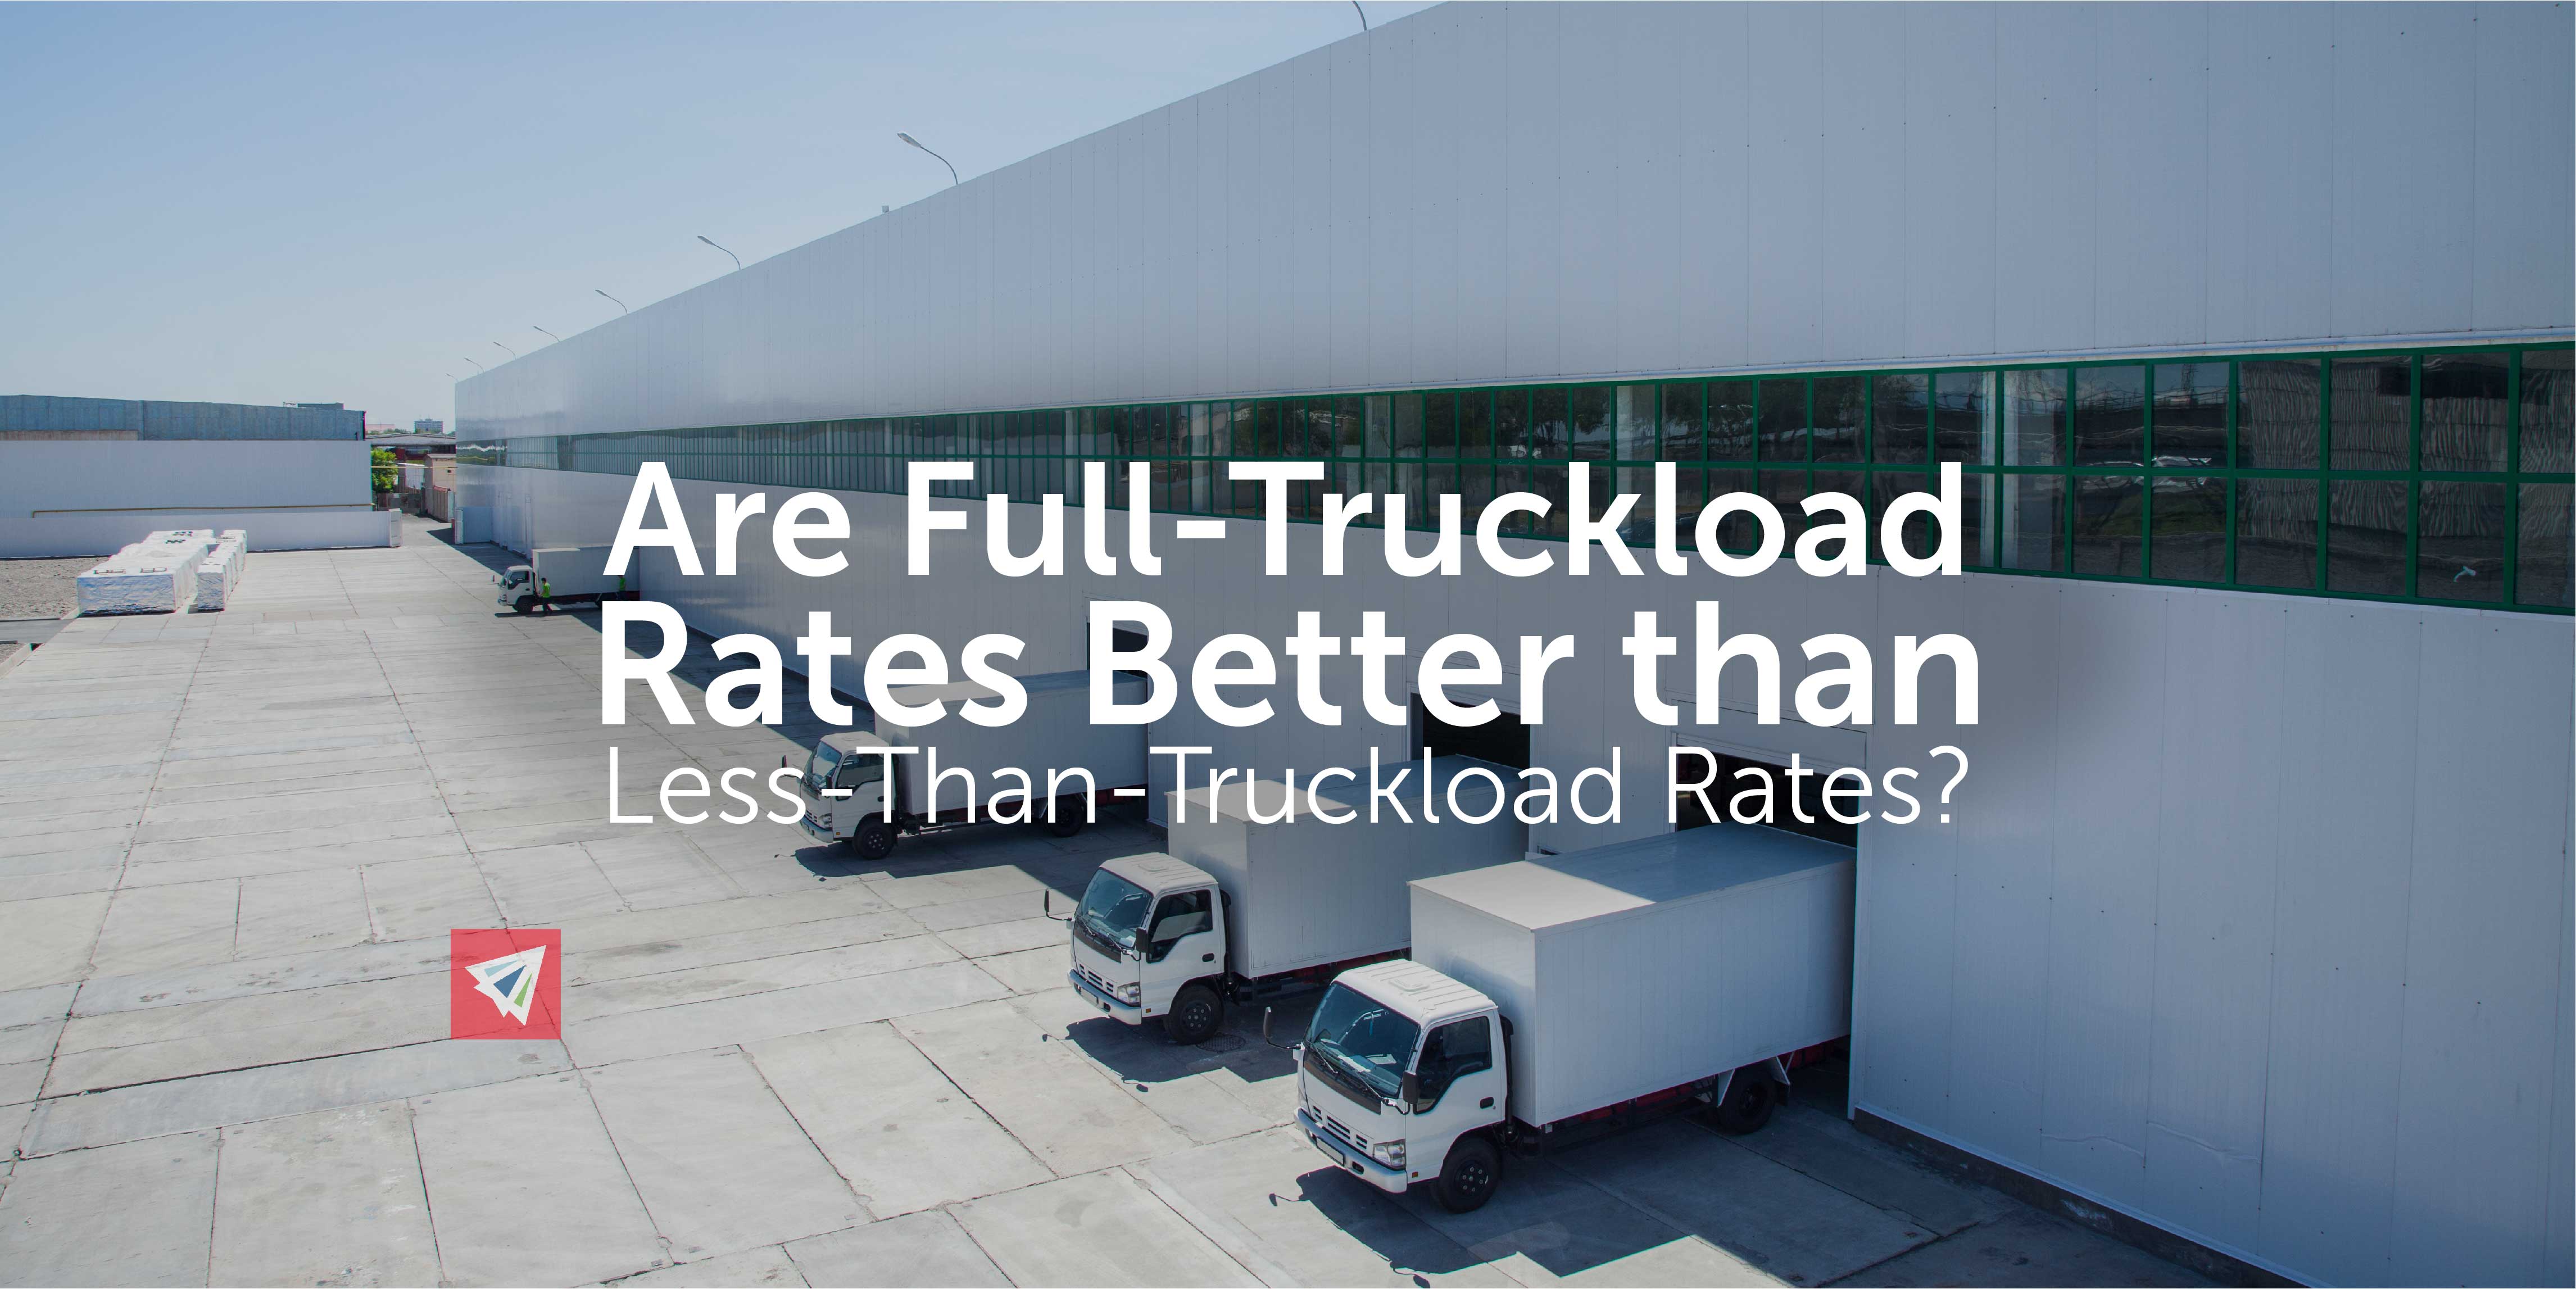 Are Full Truckload Rates Better than Less Than Truckload Rates